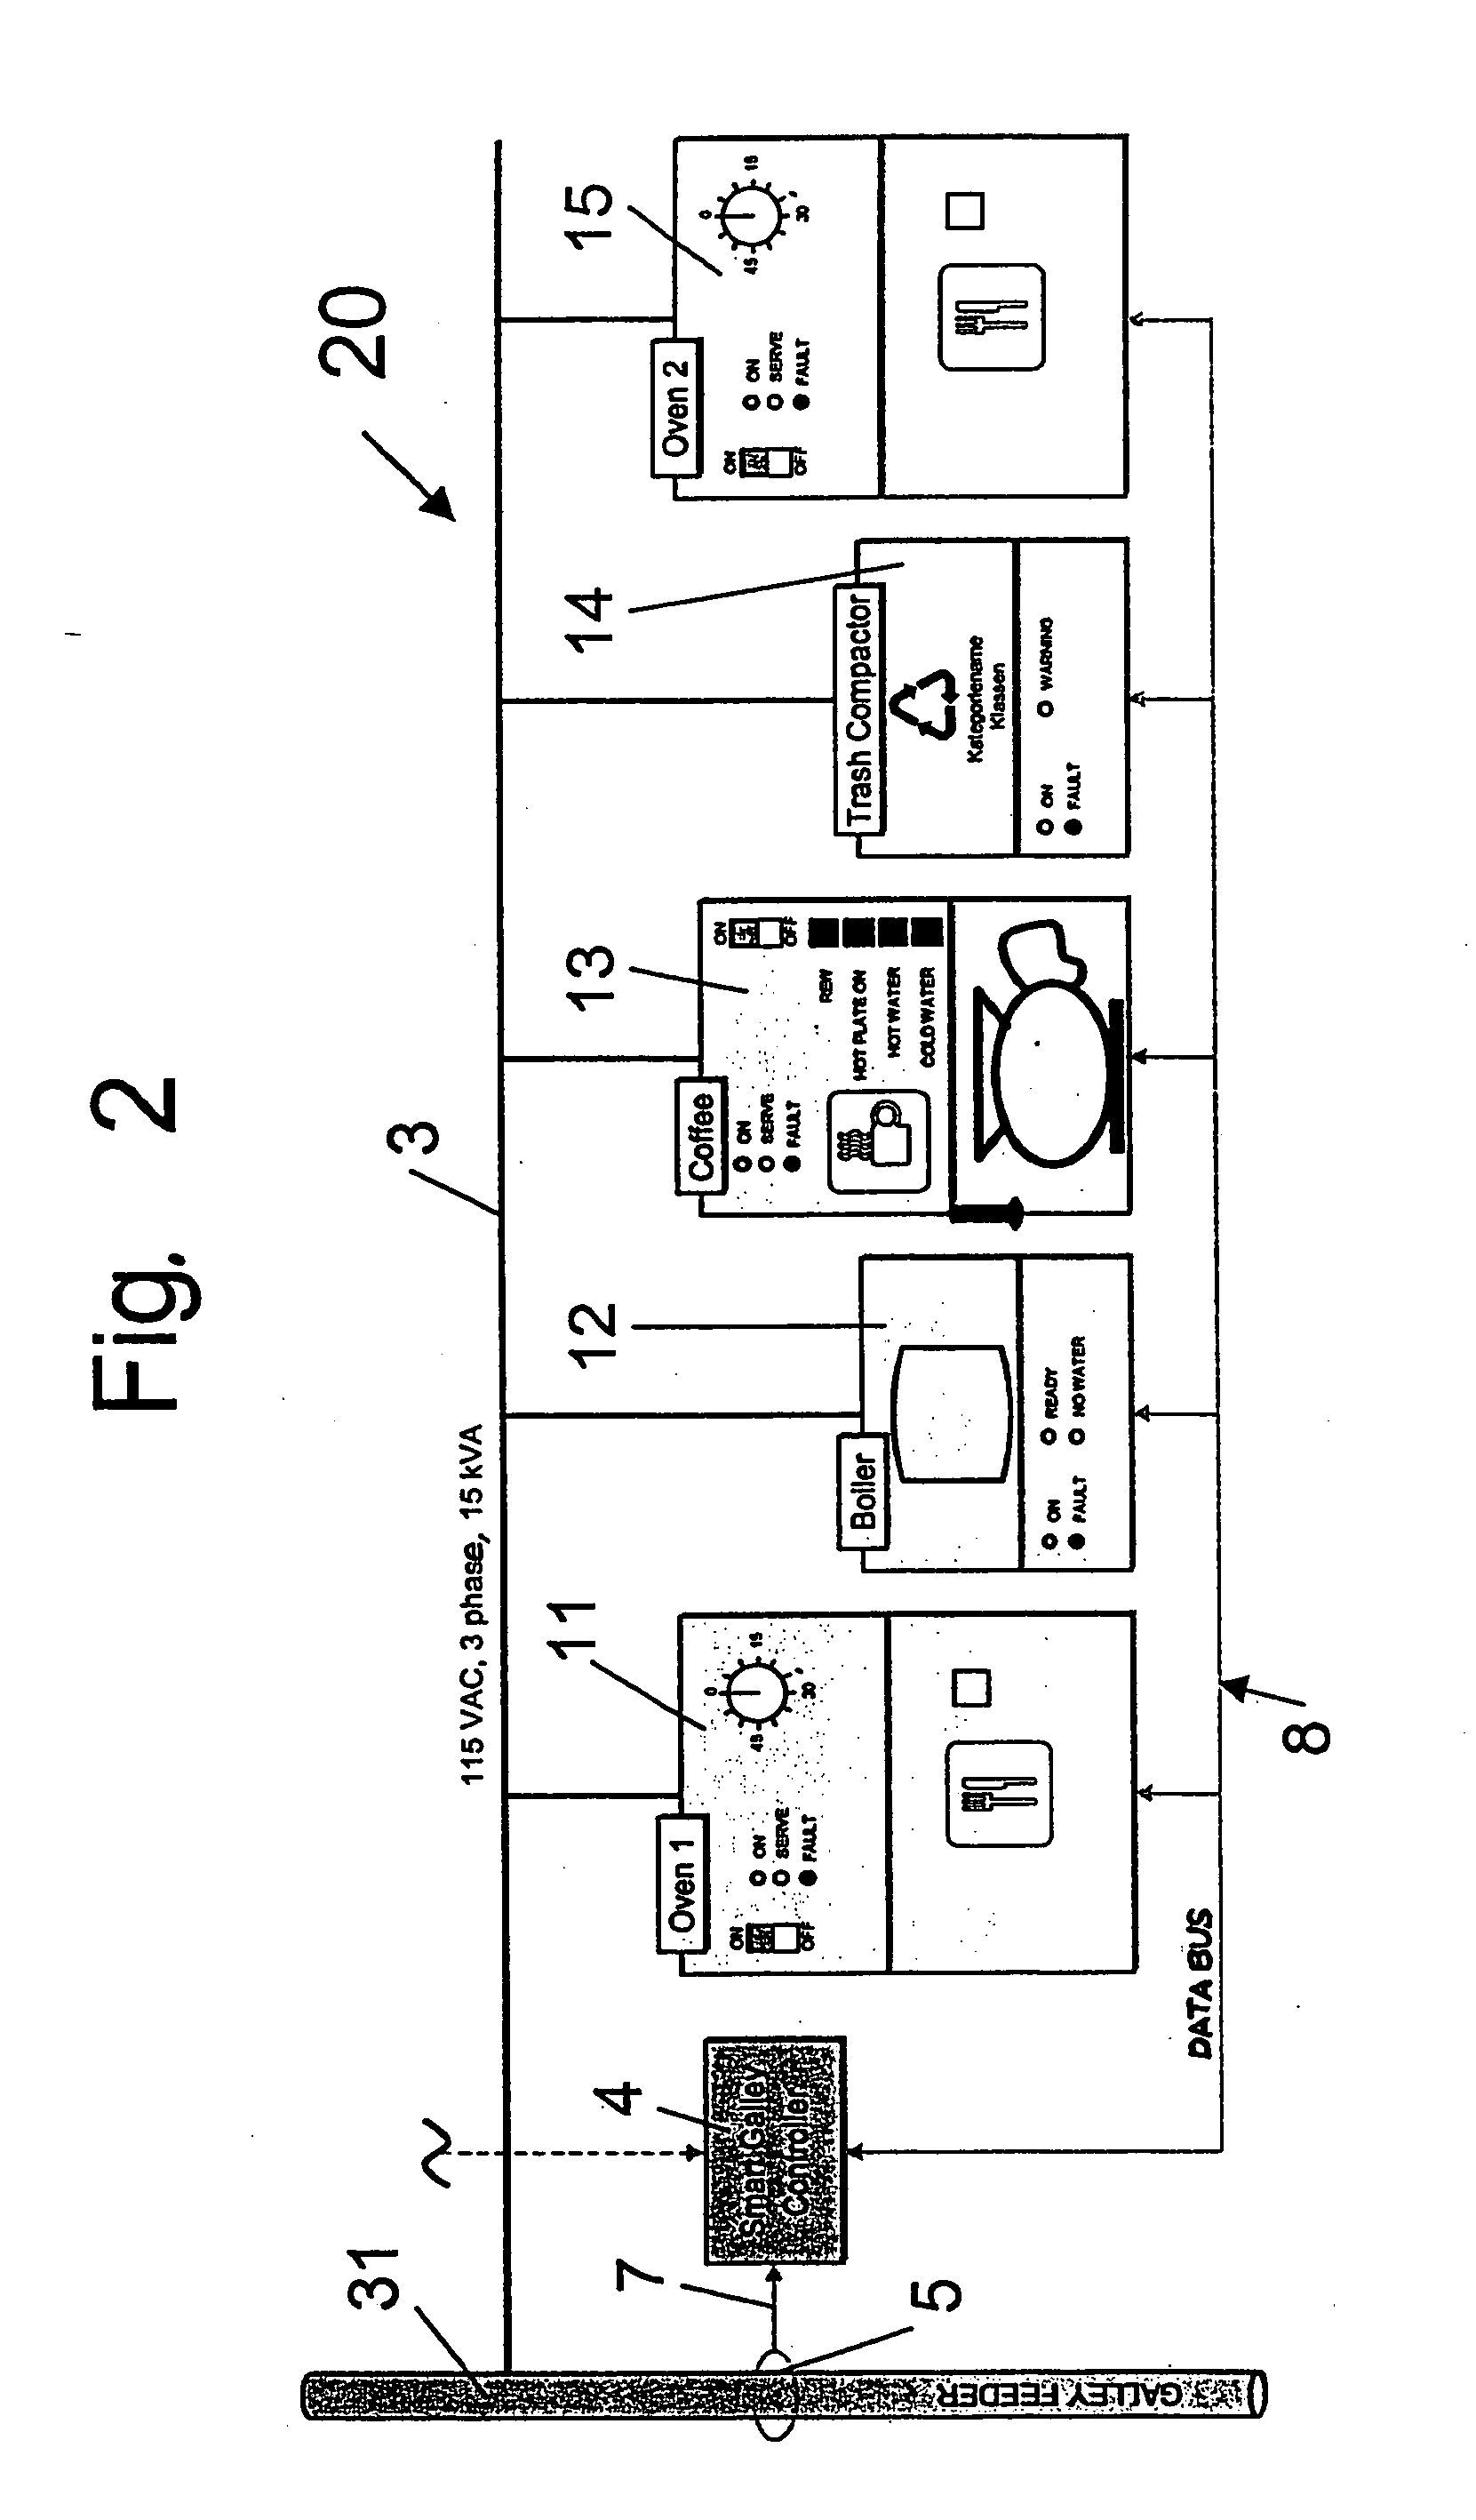 Intelligent power distribution management for an on-board galley of a transport vehicle such as an aircraft